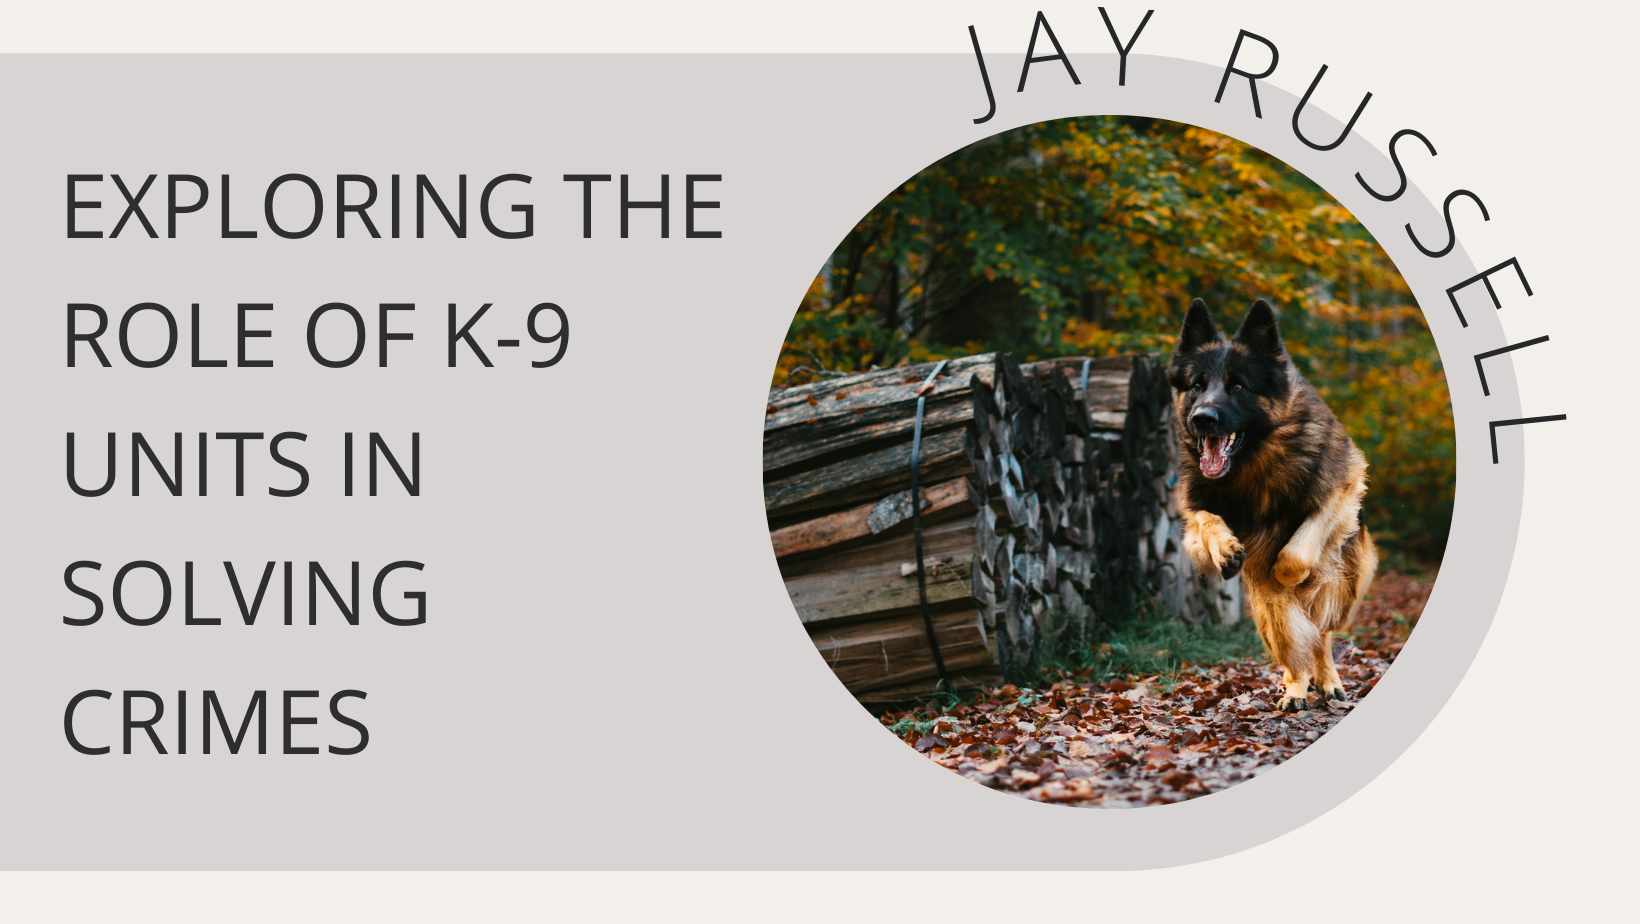 Exploring the Role of K-9 Units in Solving Crimes